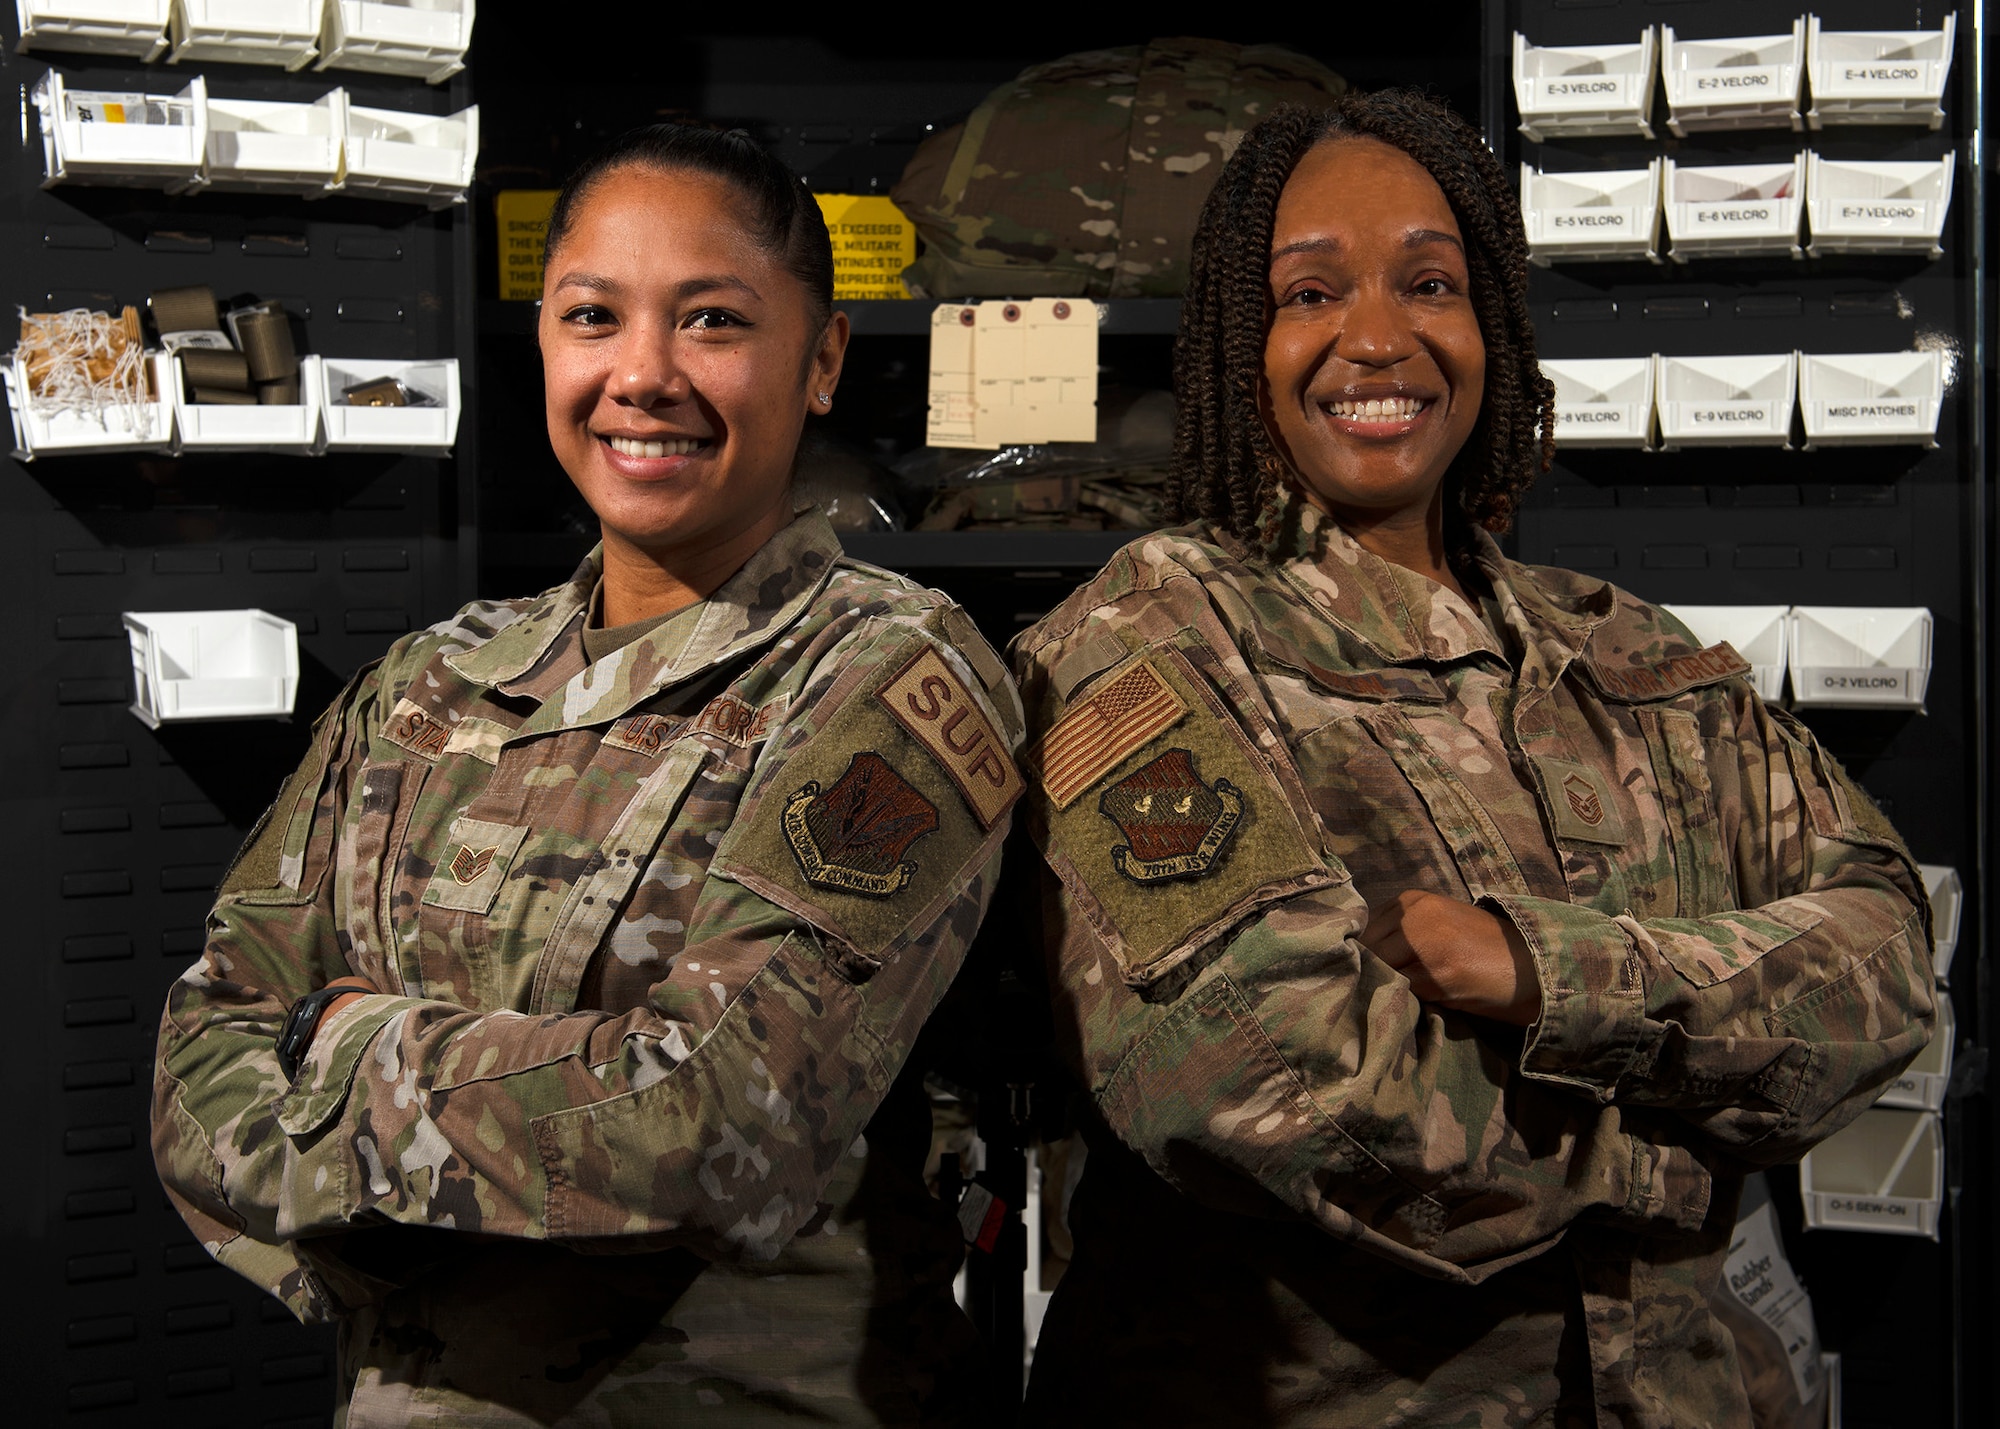 U.S. Air Force Staff Sgt. Breanne Stack, 70th Intelligence, Surveillance and Reconnaissance Wing Logistics Office material management non-commissioned officer in-charge, and U.S. Air Force Master Sgt. April Nixon, 70th ISRW Logistics Office superintendent, pose for a photo, Nov. 16, 2022, at Fort George G. Meade, Maryland. The mission of logistics is to develop, evaluate, monitor, inspect wing logistics activities; plan and support wing deployment activities; initiate, monitor, and update inter-service and inter-agency support agreements. (U.S. Air Force photo by Staff Sgt. Kevin Iinuma)